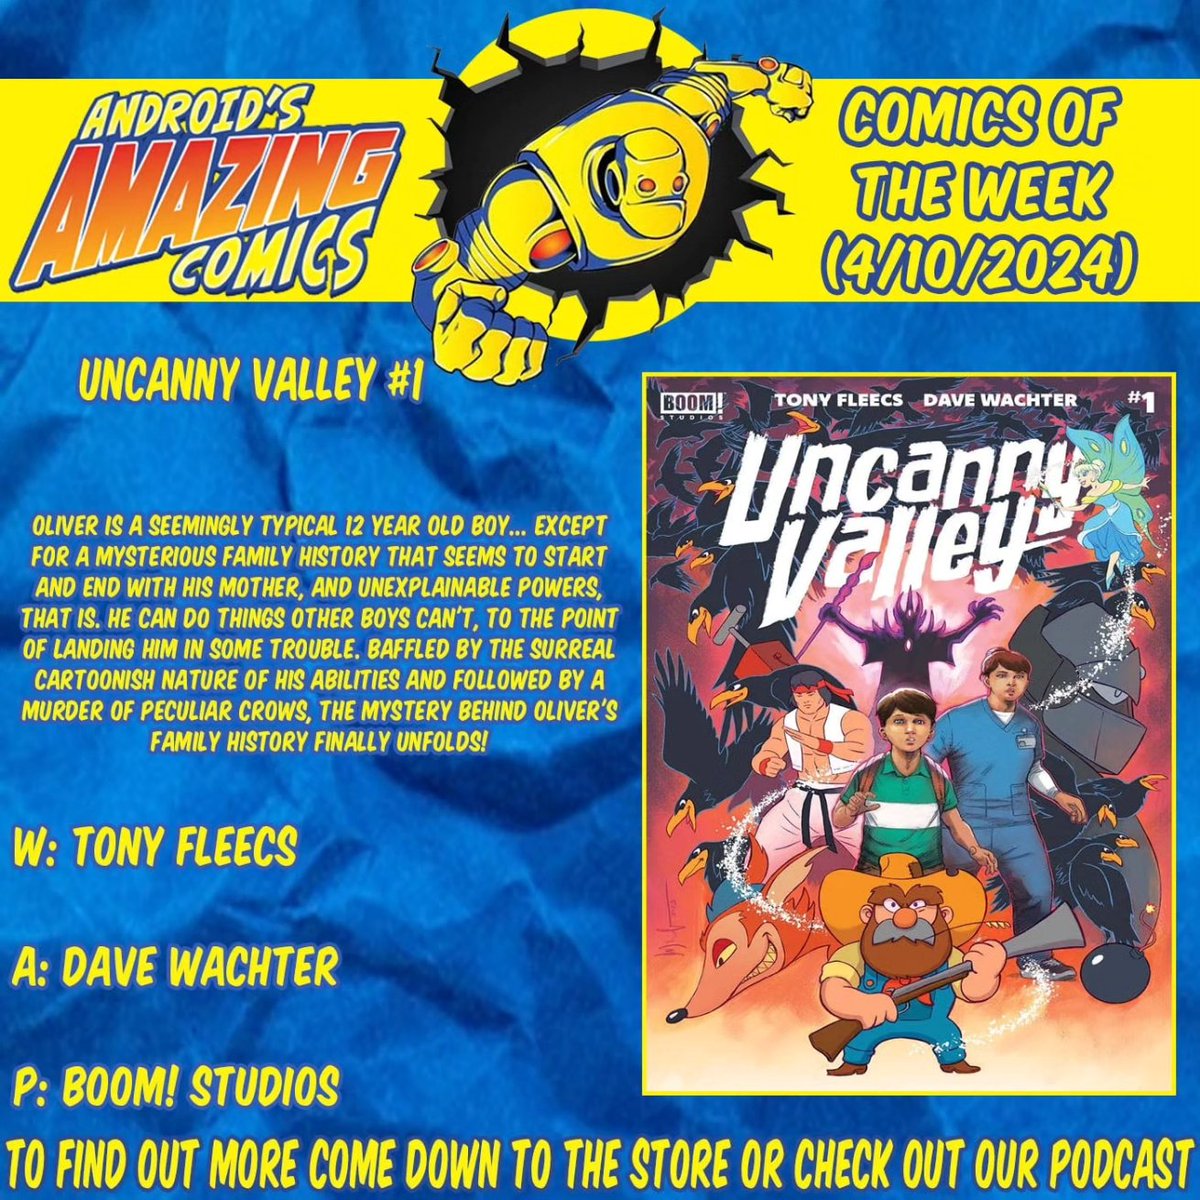 A new week means a new batch of comics! Here are our picks!

UNCANNY VALLEY
W: Tony Fleecs 
A: Dave Wachter
P: @boomstudios

#picksoftheweek #newproduct #newinstock  #comicbooks #comics #NCBD #boomstudios #uncannyvalley